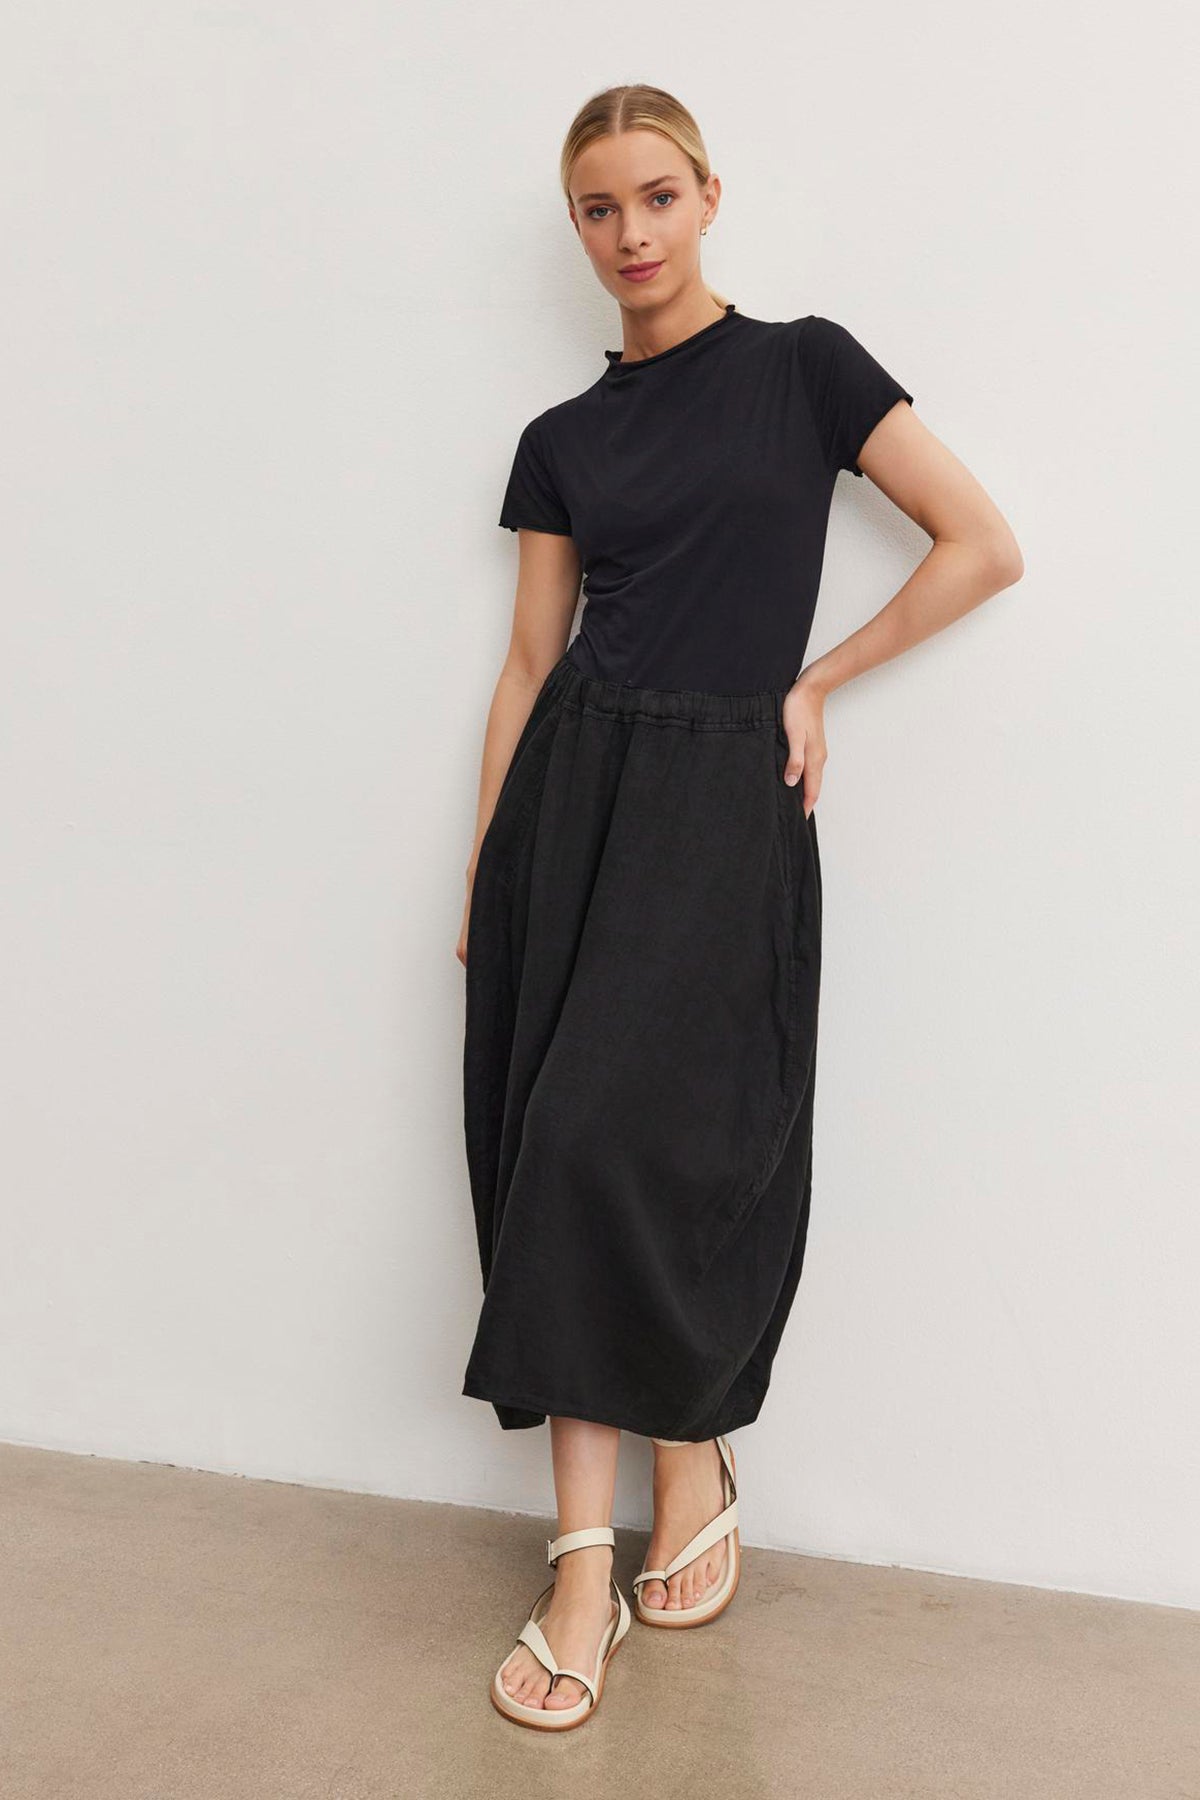 A woman in a black JACKIE MOCK NECK TEE by Velvet by Graham & Spencer and black midi skirt stands against a white wall, white sandals adorning her feet. She is leaning to her left with her hand casually slipped in her pocket.-37104257794241